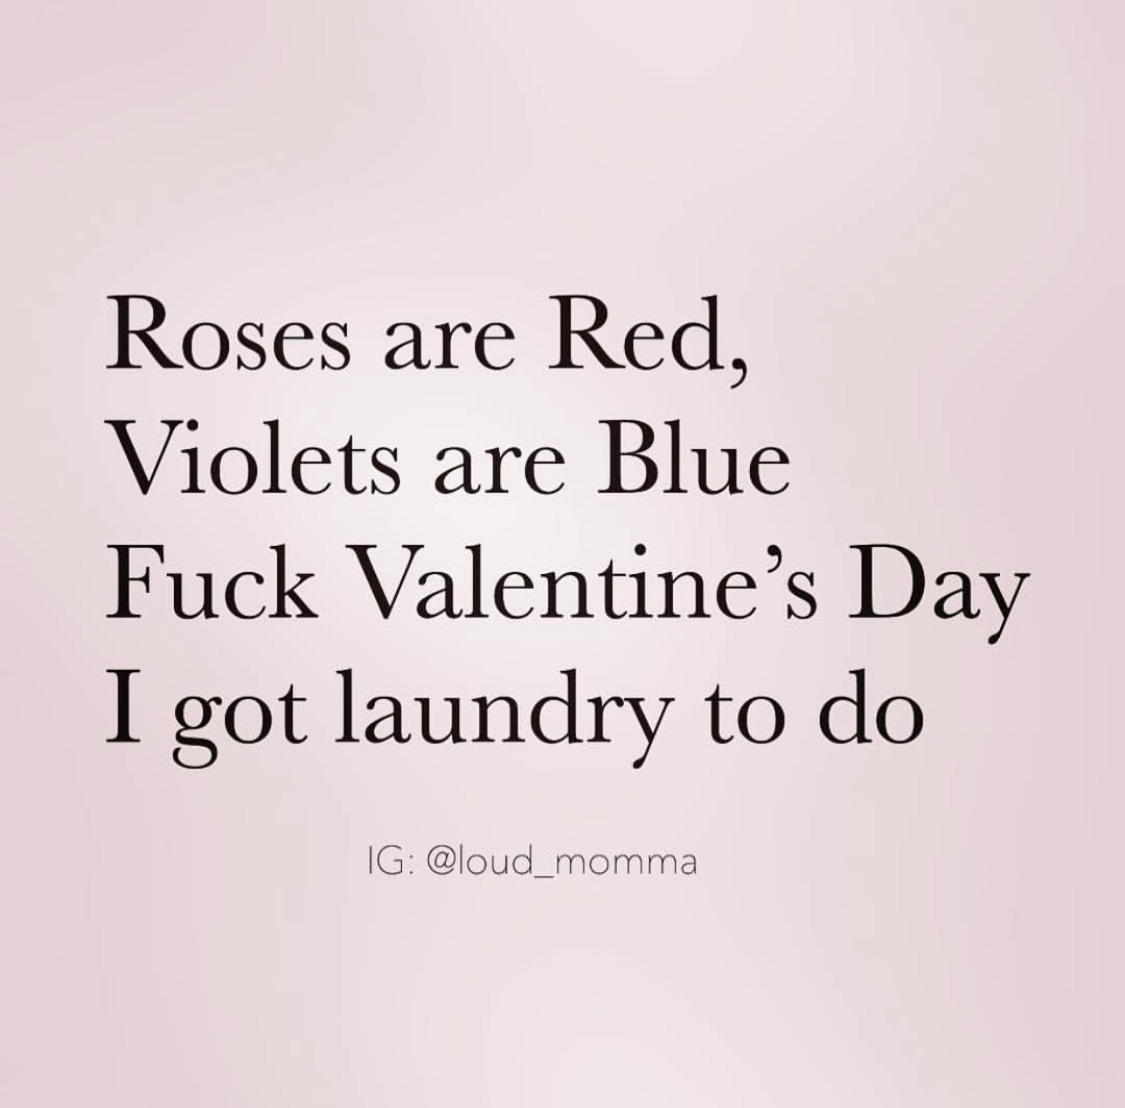 a meme with a pink background that says "Roses are red, violets are blue, fuck valentine's day, I've got laundry to do"